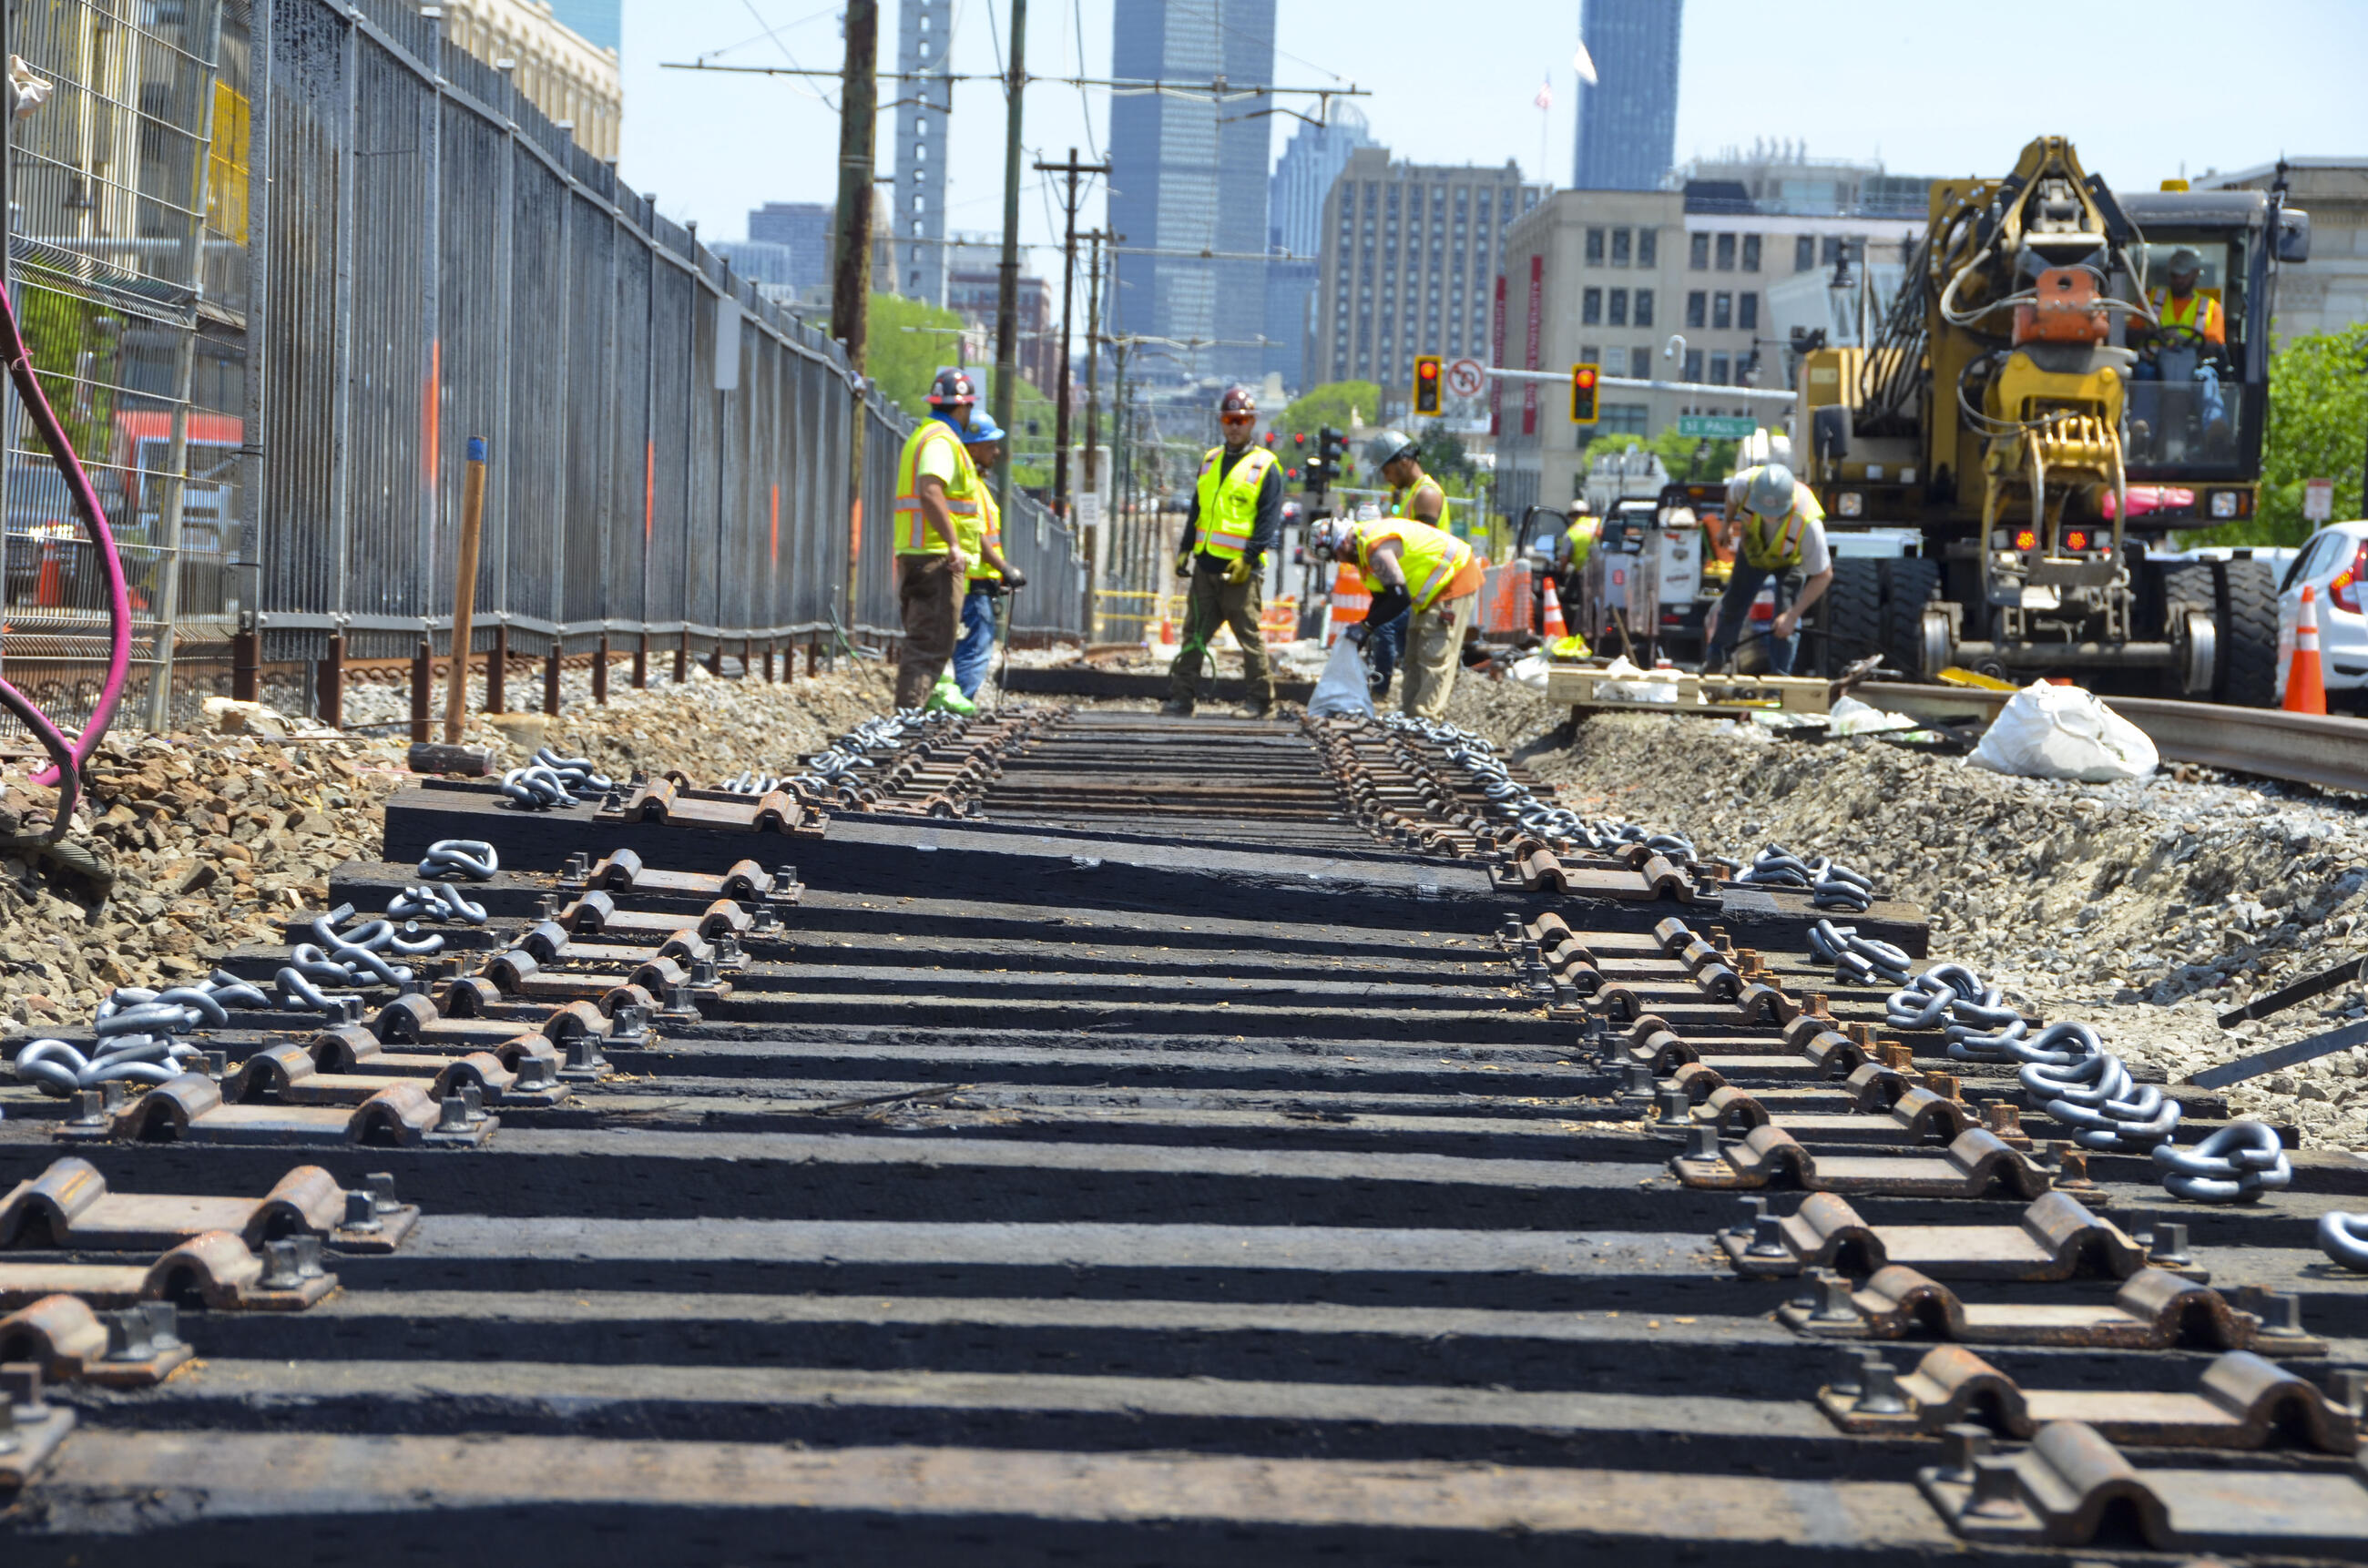 six crew members in high vis and hard hats working on track on the b branch on a sunny day. many lines of track are in the foreground